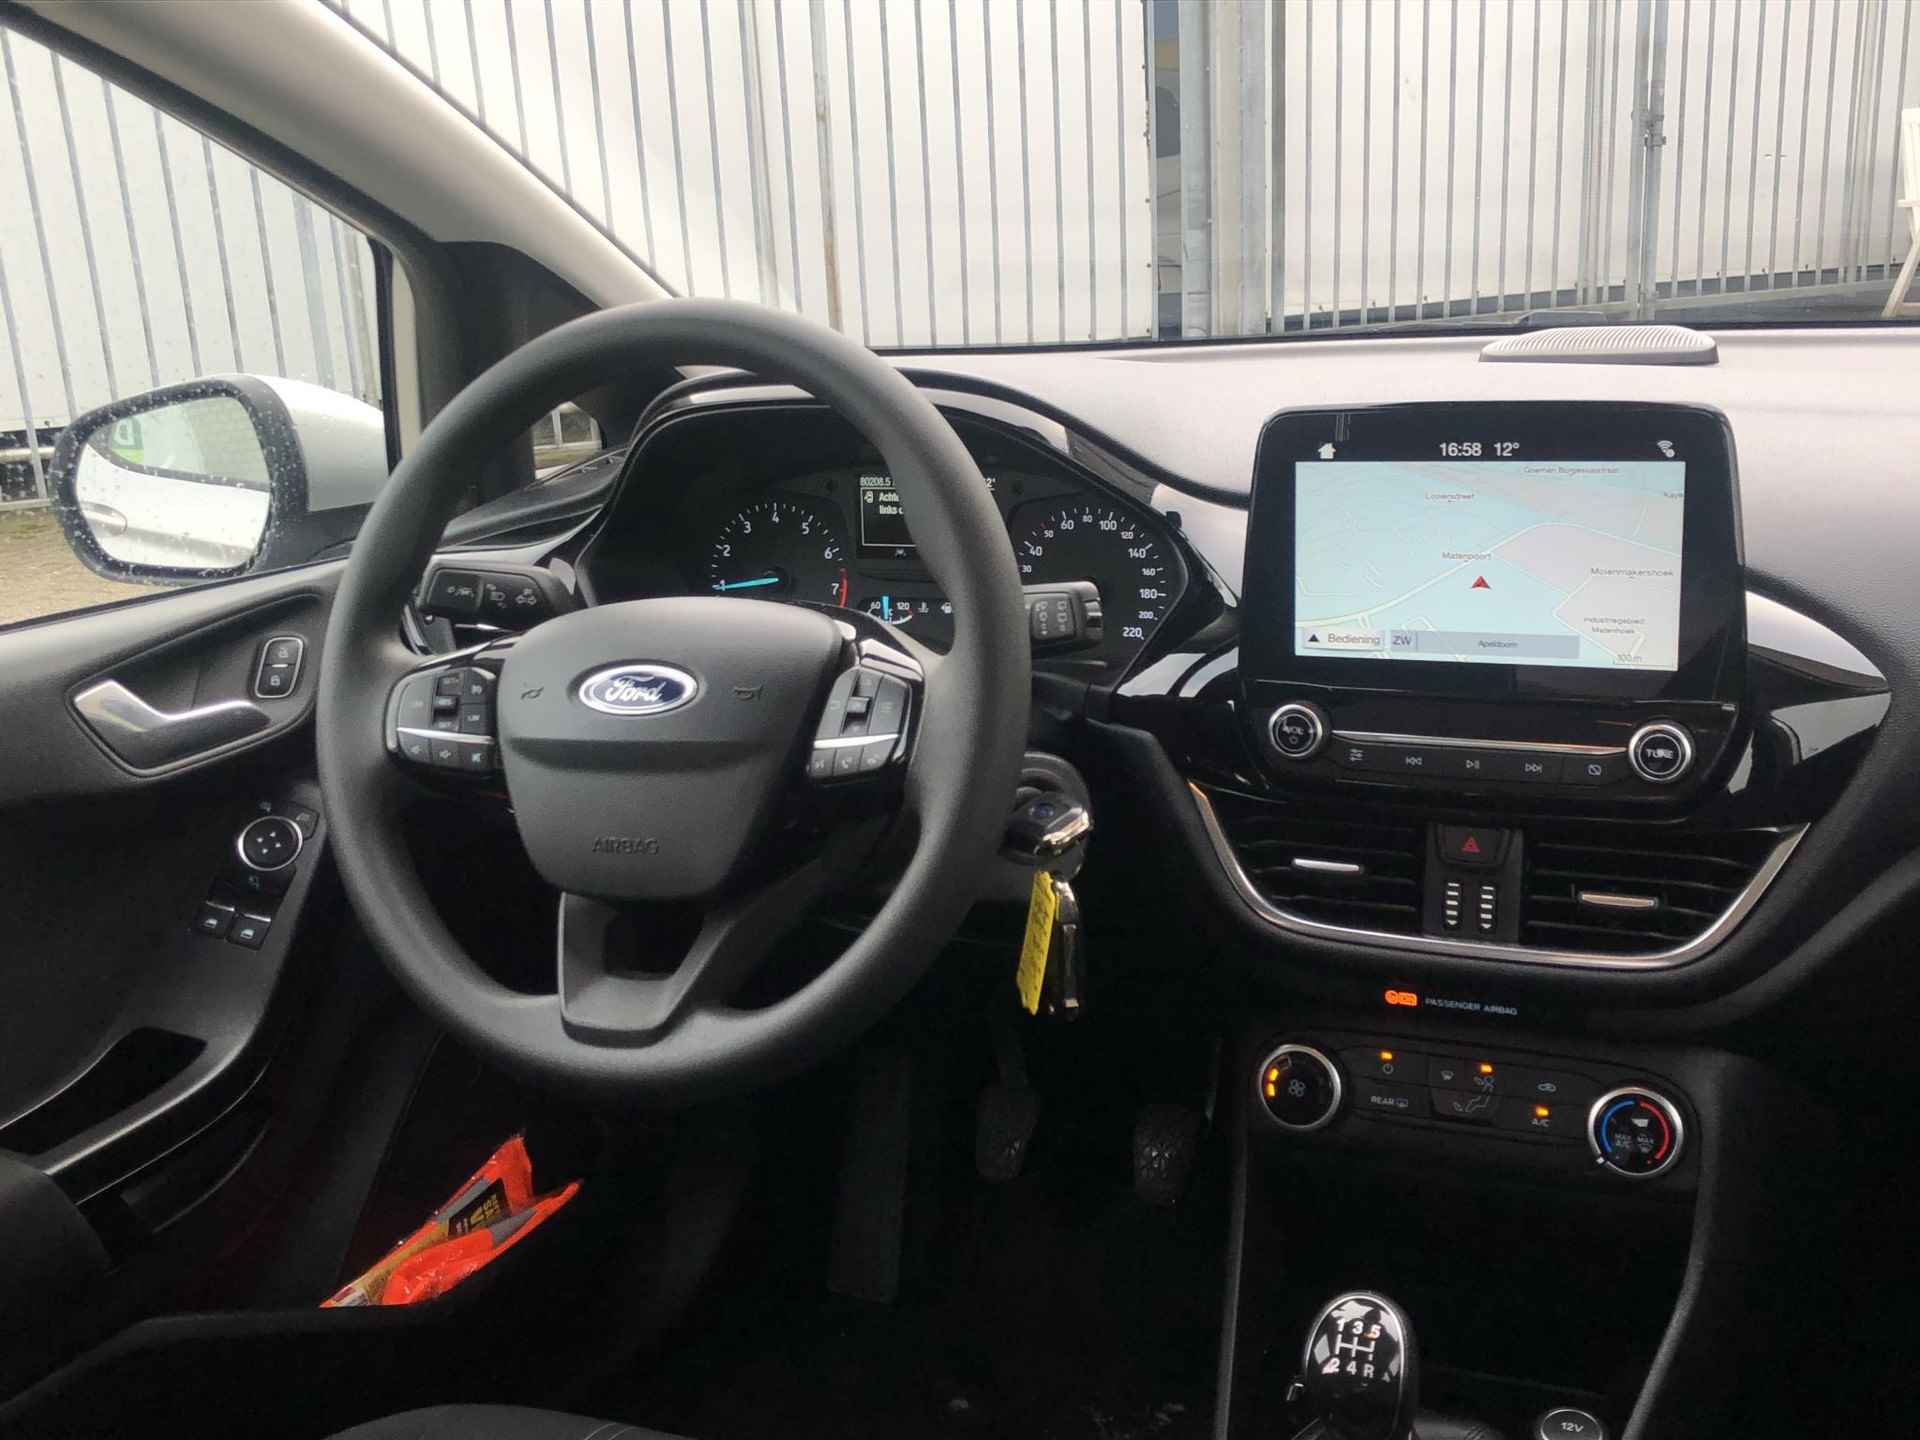 Ford Fiesta 1.1 85pk Trend l Navigatie l Apple Carplay/Android Auto l Airconditioning l Cruise control - 4/23